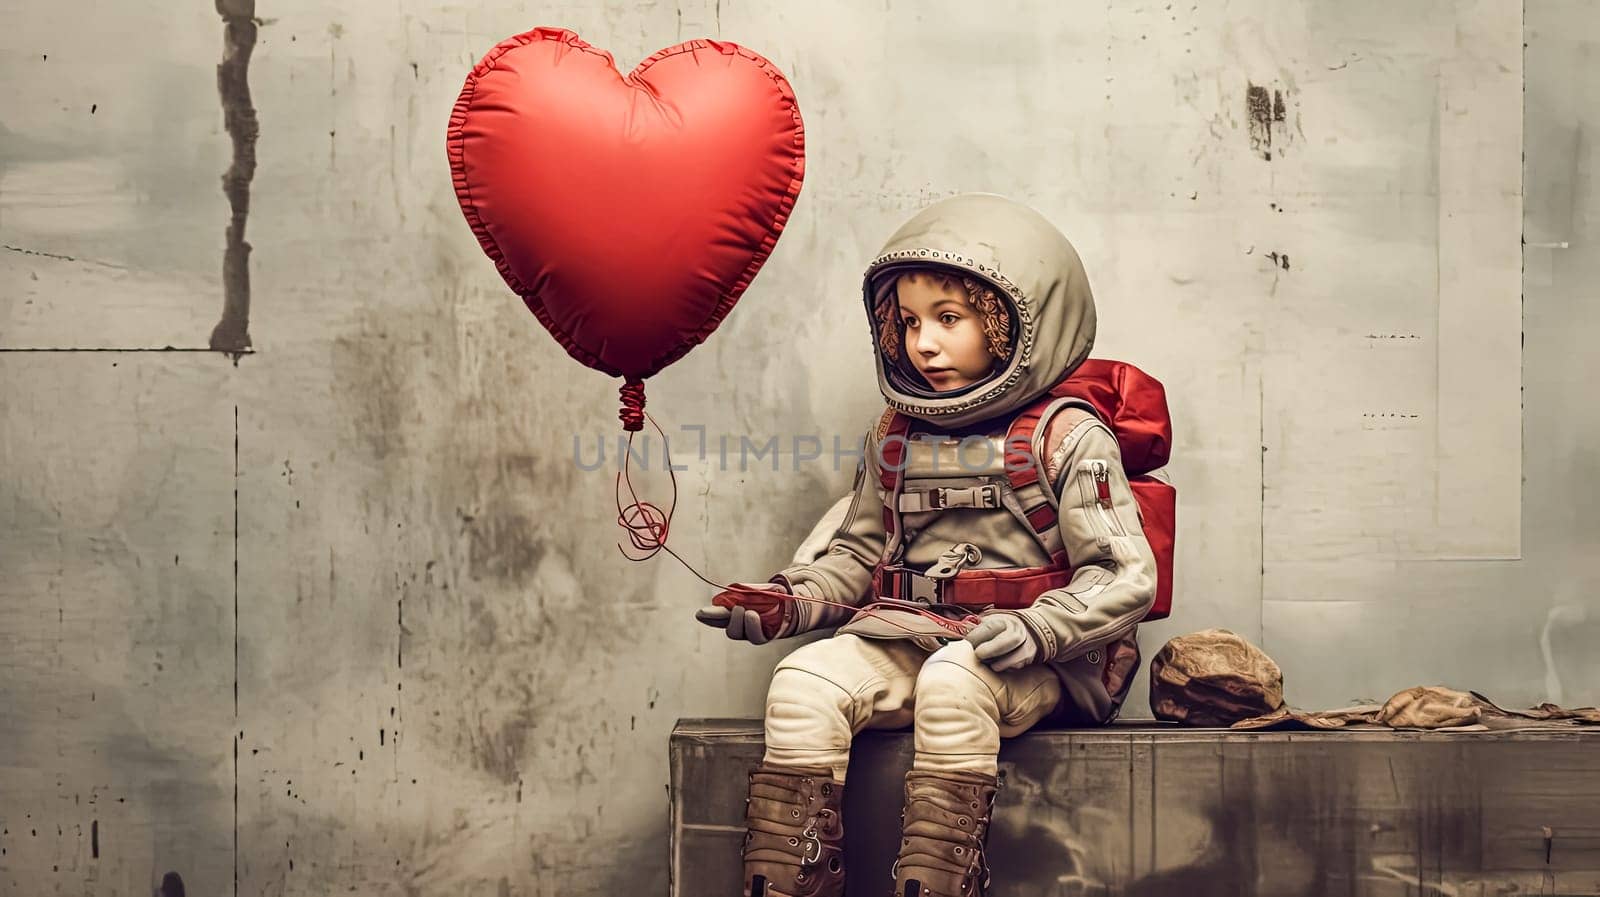 Innocence in space, Kid in astronaut attire with a heart balloon a tender scene blending youthful wonder with cosmic aspirations